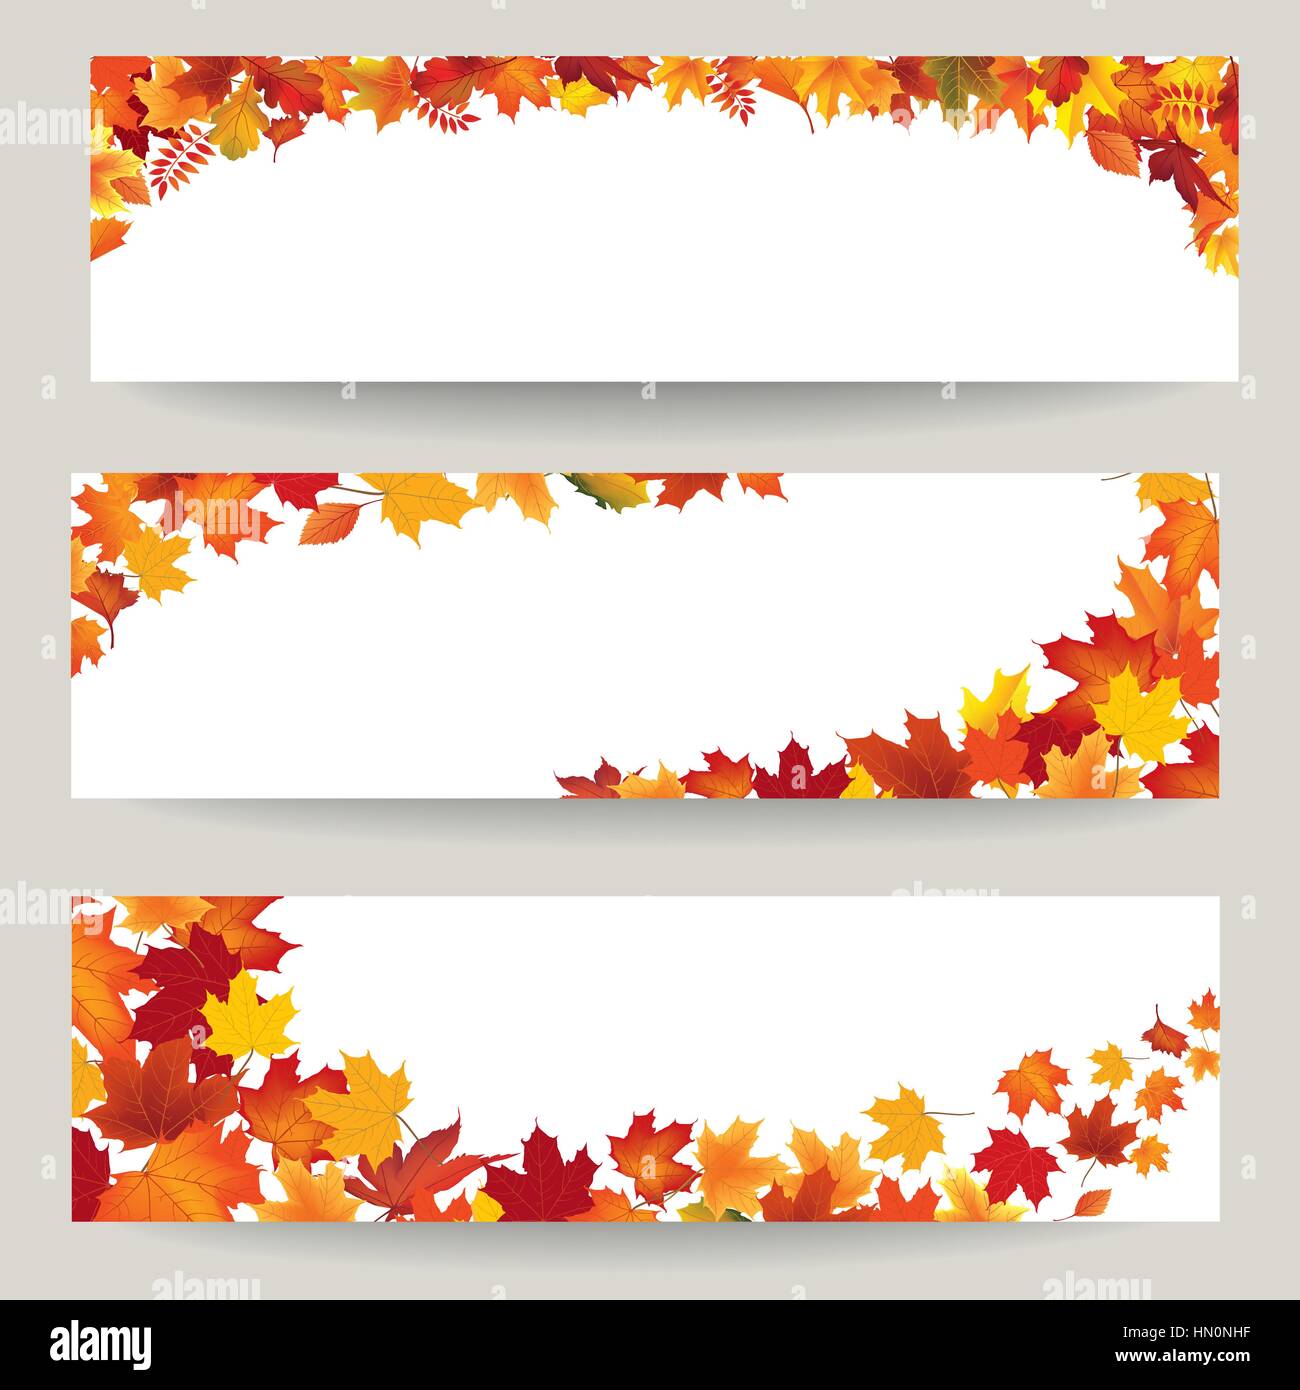 Fall leaves banner set. Swirl autumn leaf background. Nature border decor collection Stock Vector